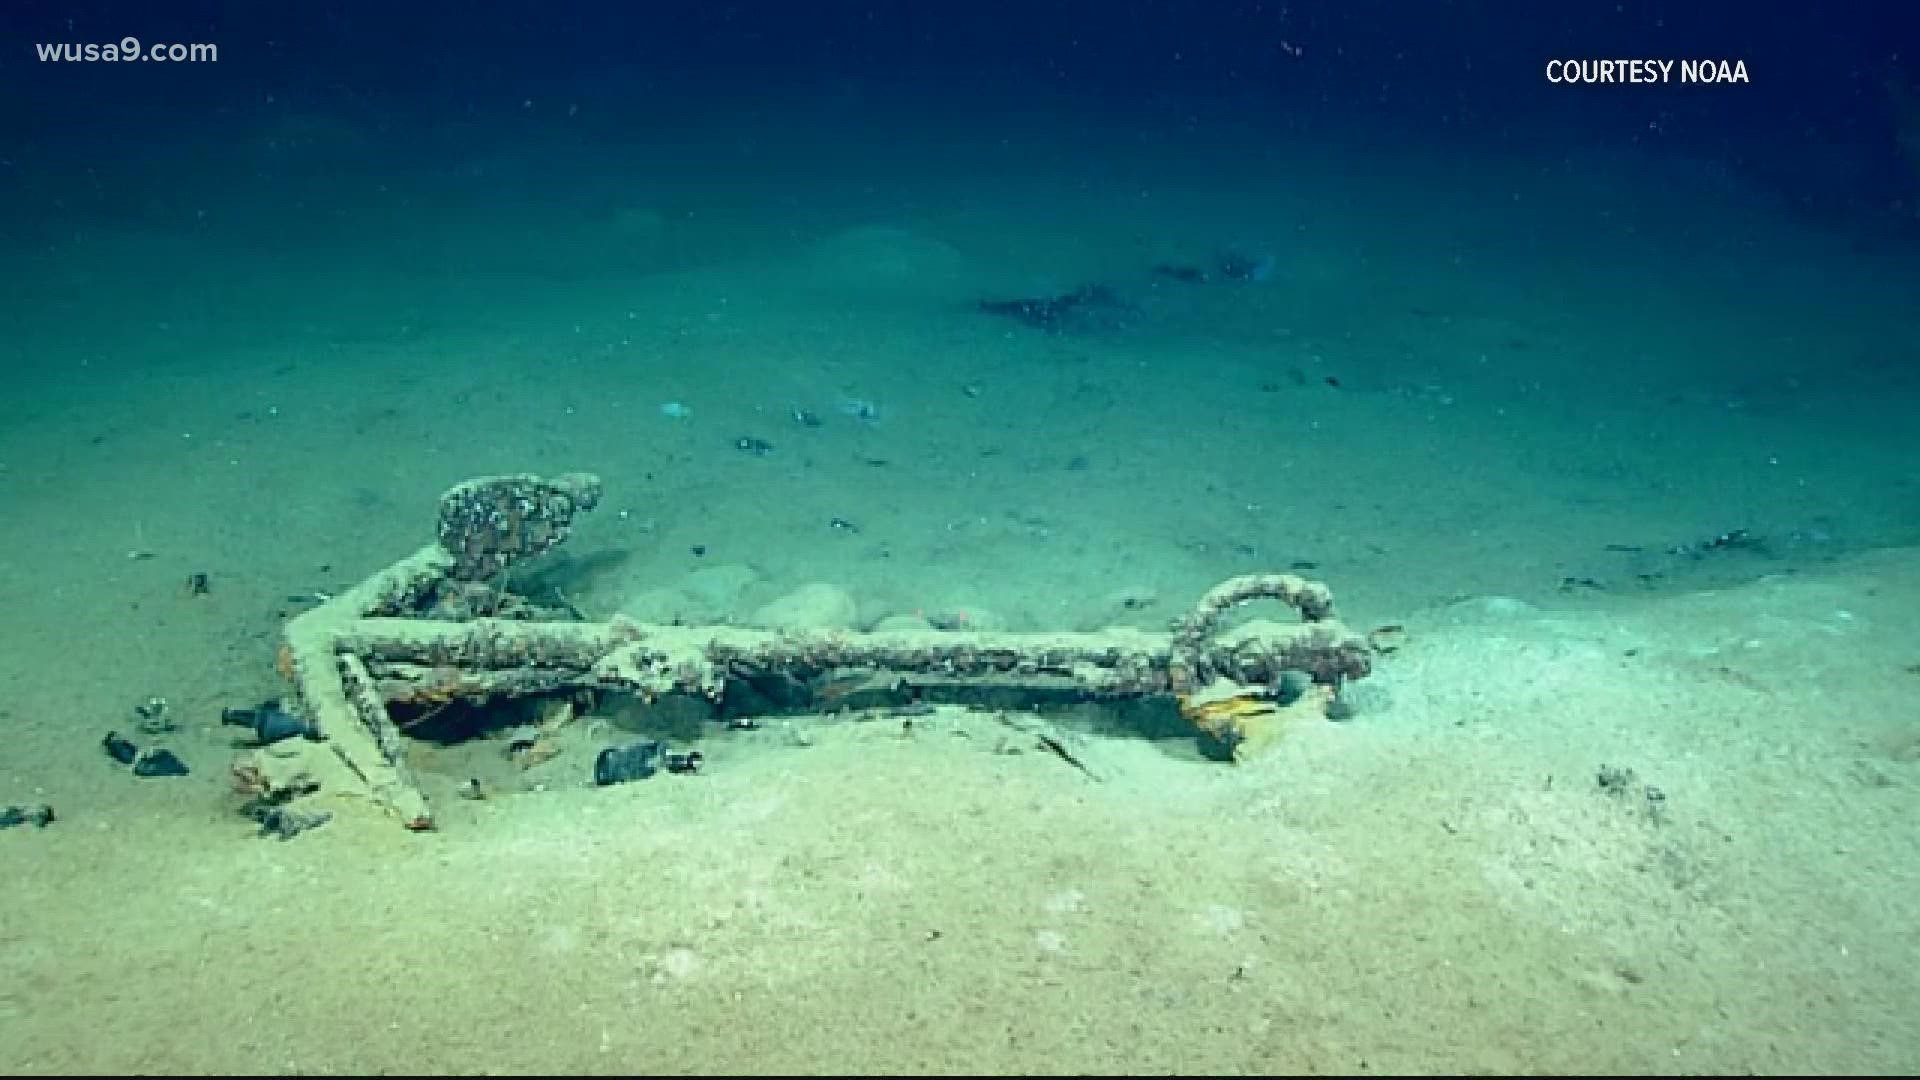 The wreckage of a whaling ship found at the bottom of the Gulf of Mexico opens a door to 19th history.